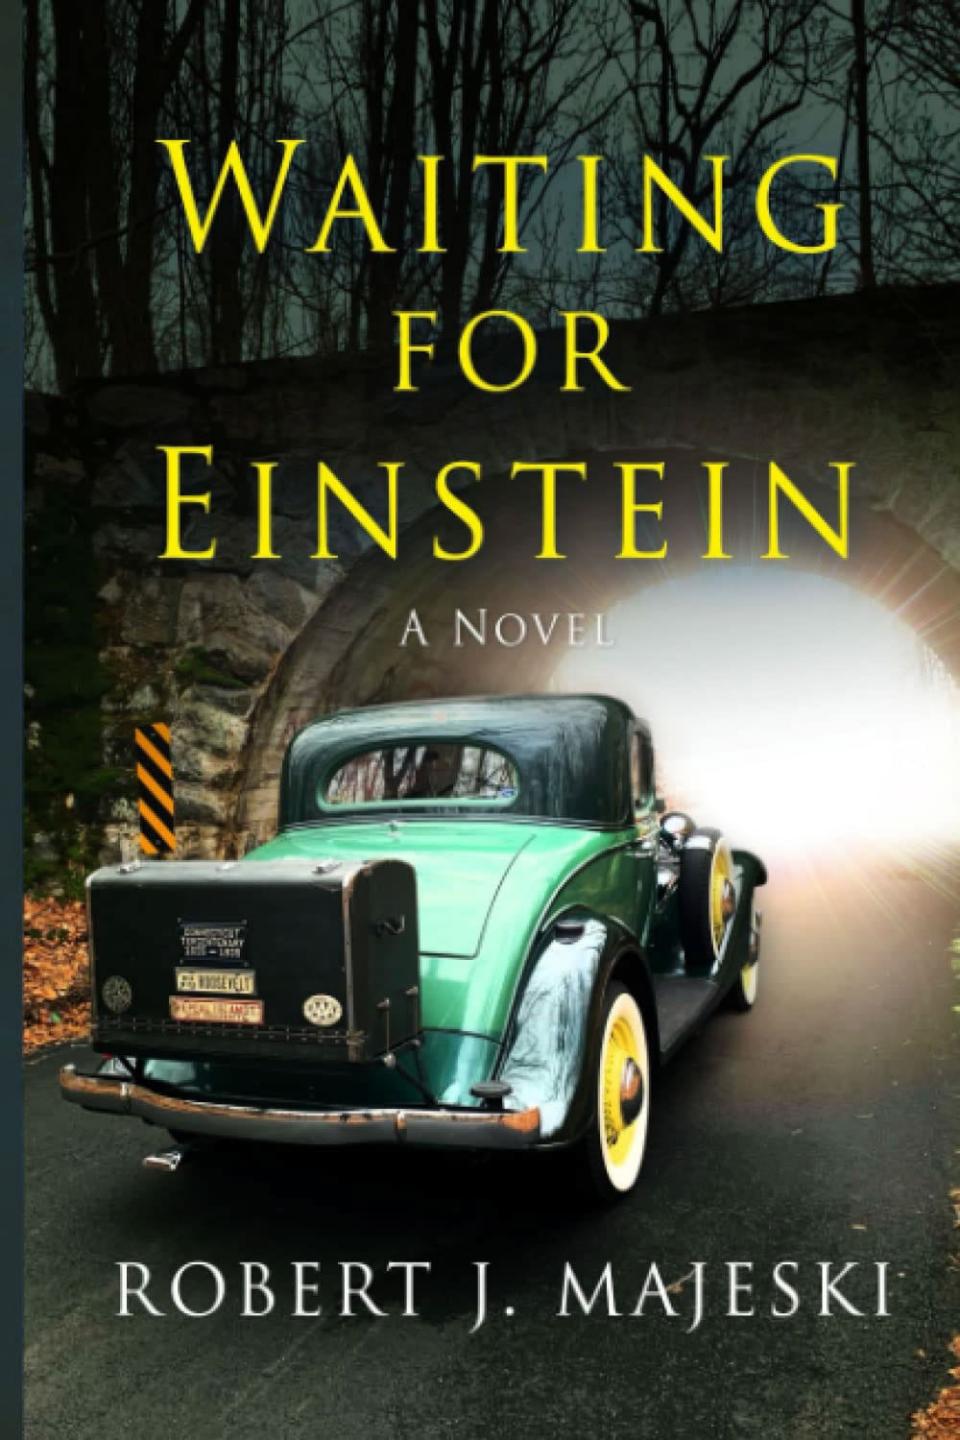 "Waiting for Einstein" is a new fantasy novel by Robert J. Majeski just released by Wilmington-based Simply Francis Publishing.